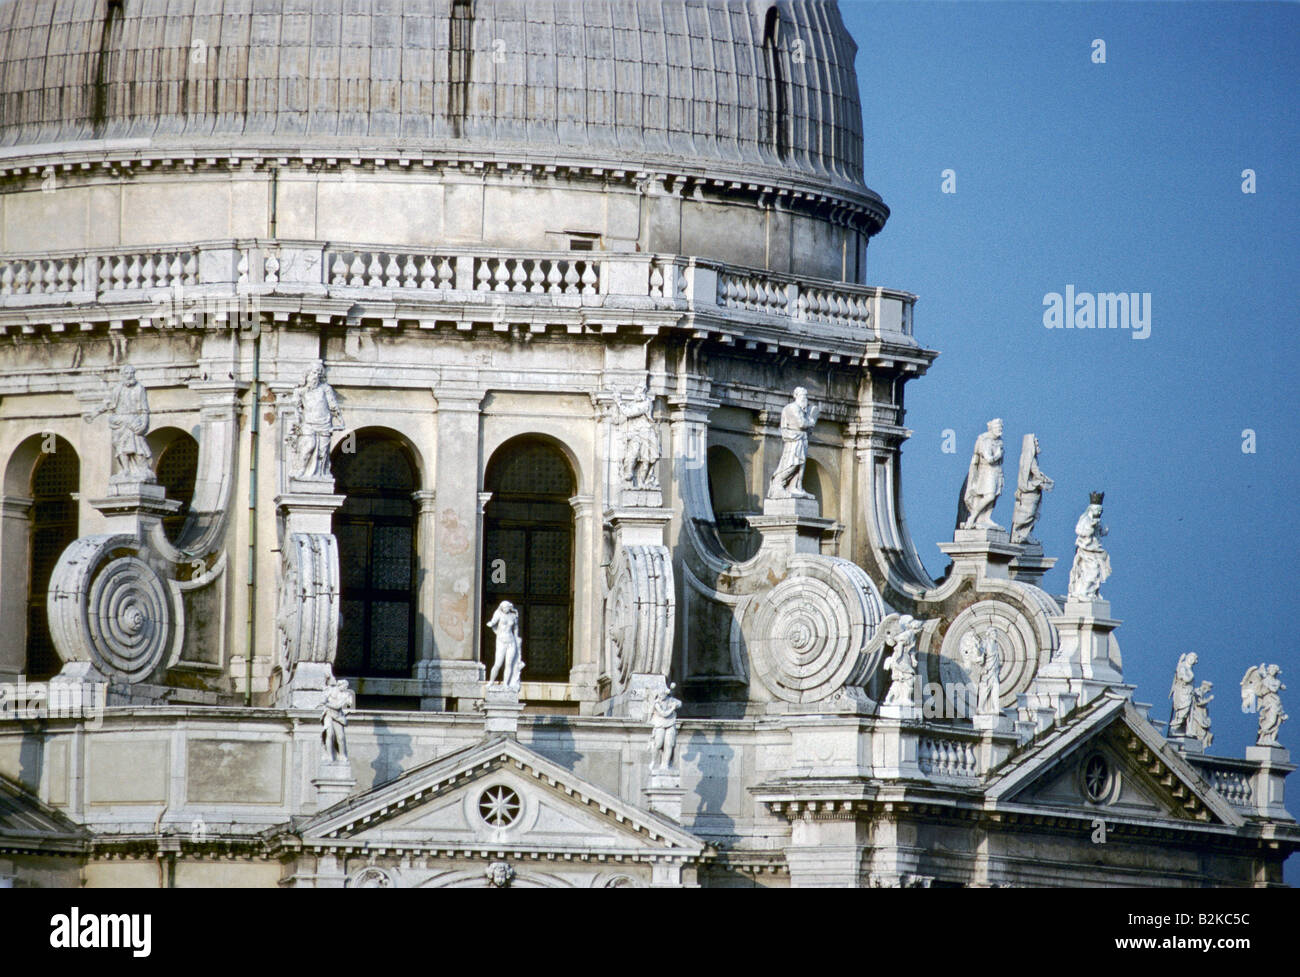 MOULDINGS AND STATUES ON THE EXTERIOR OF ST MARK S CATHEDRAL VENICE Stock Photo